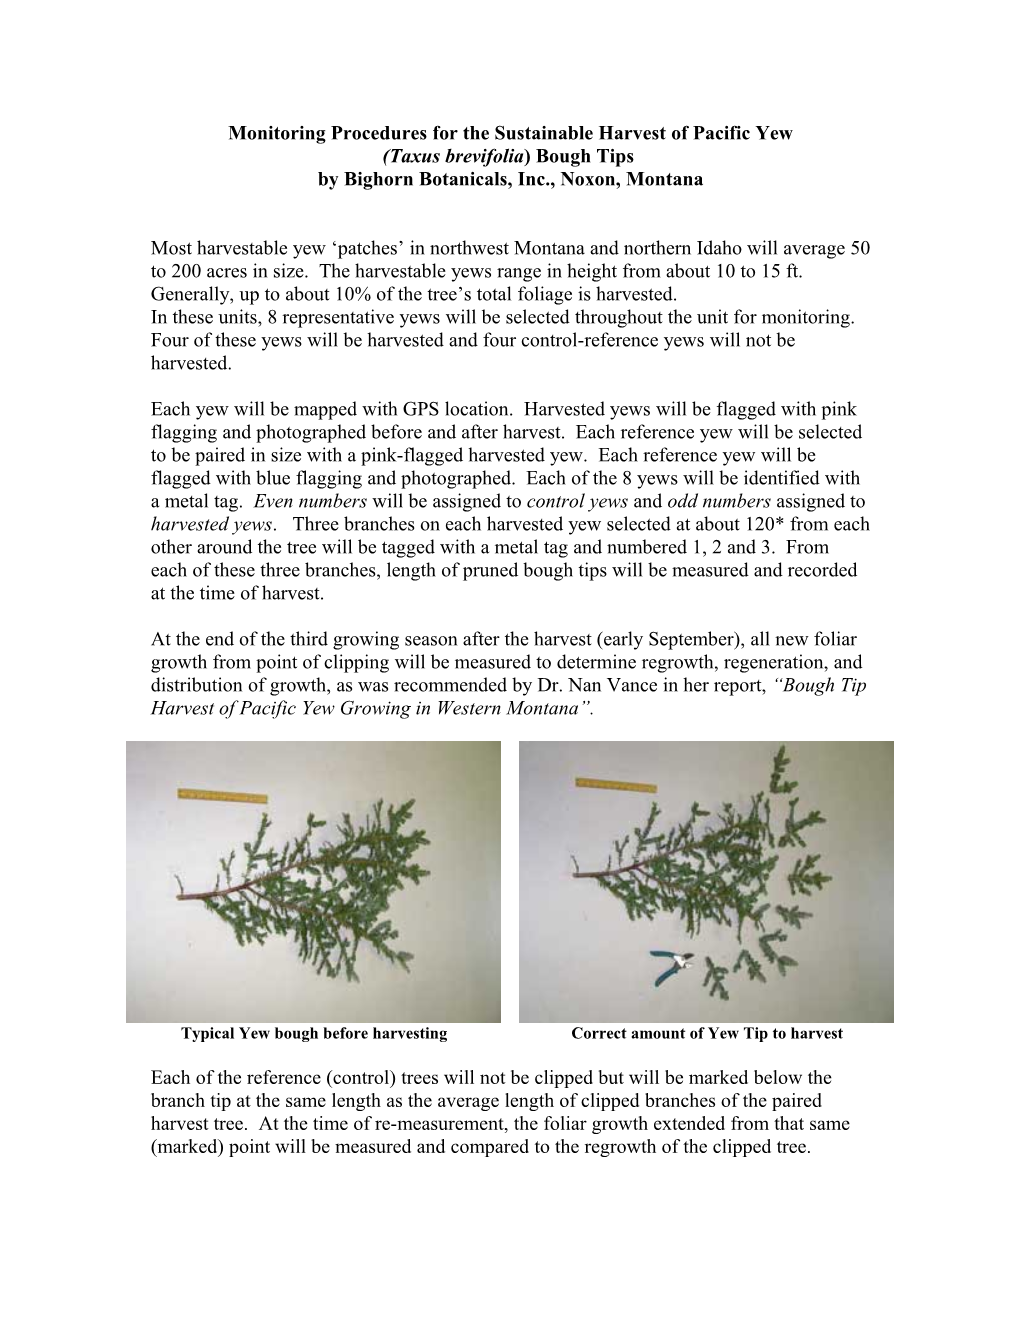 Monitoring Precedures for the Sustainable Harvest of Pacific Yew